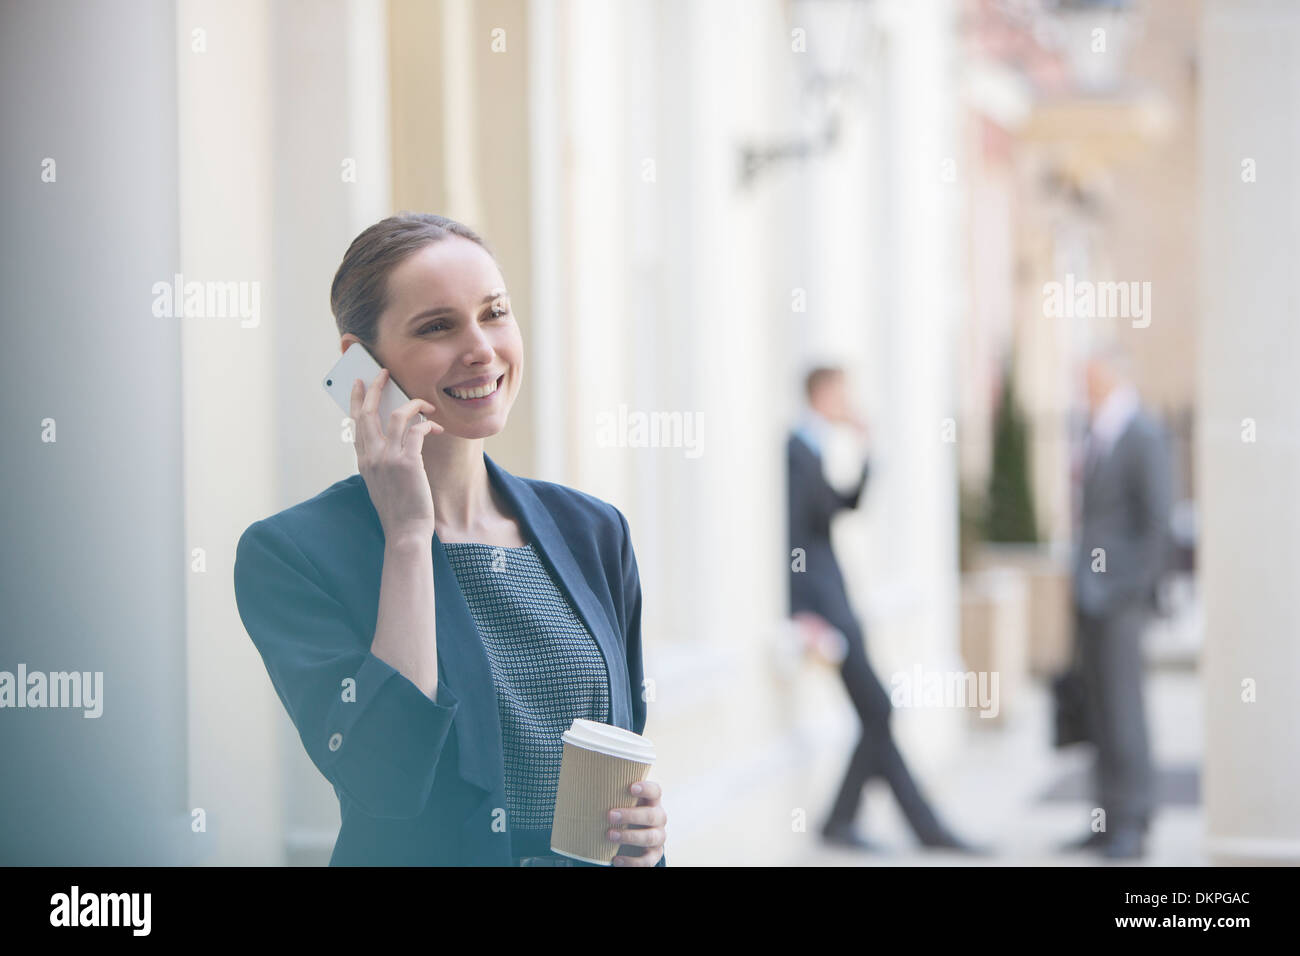 Businesswoman talking on cell phone on city street Stock Photo